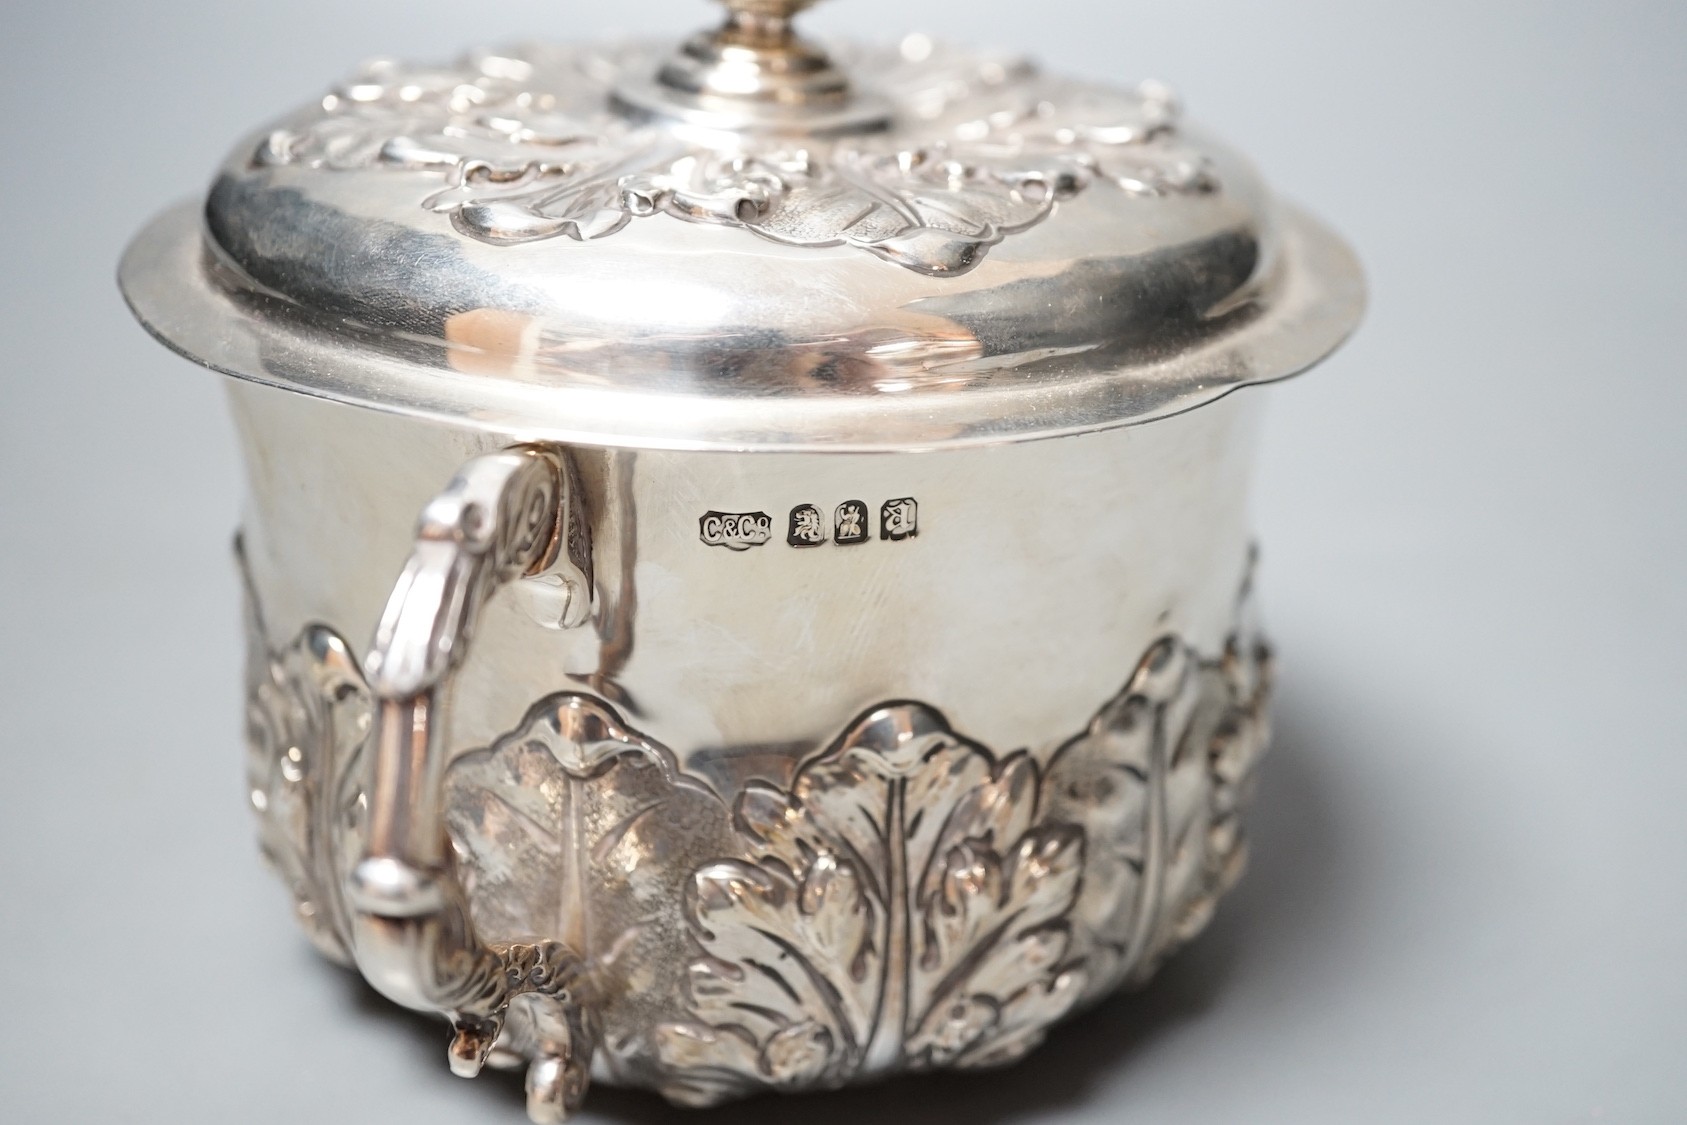 A George V embossed Brittania standard silver two handled presentation bowl and cover, Carrington & Co, London, 1916, diameter 18.6cm over handles, 18.5oz.